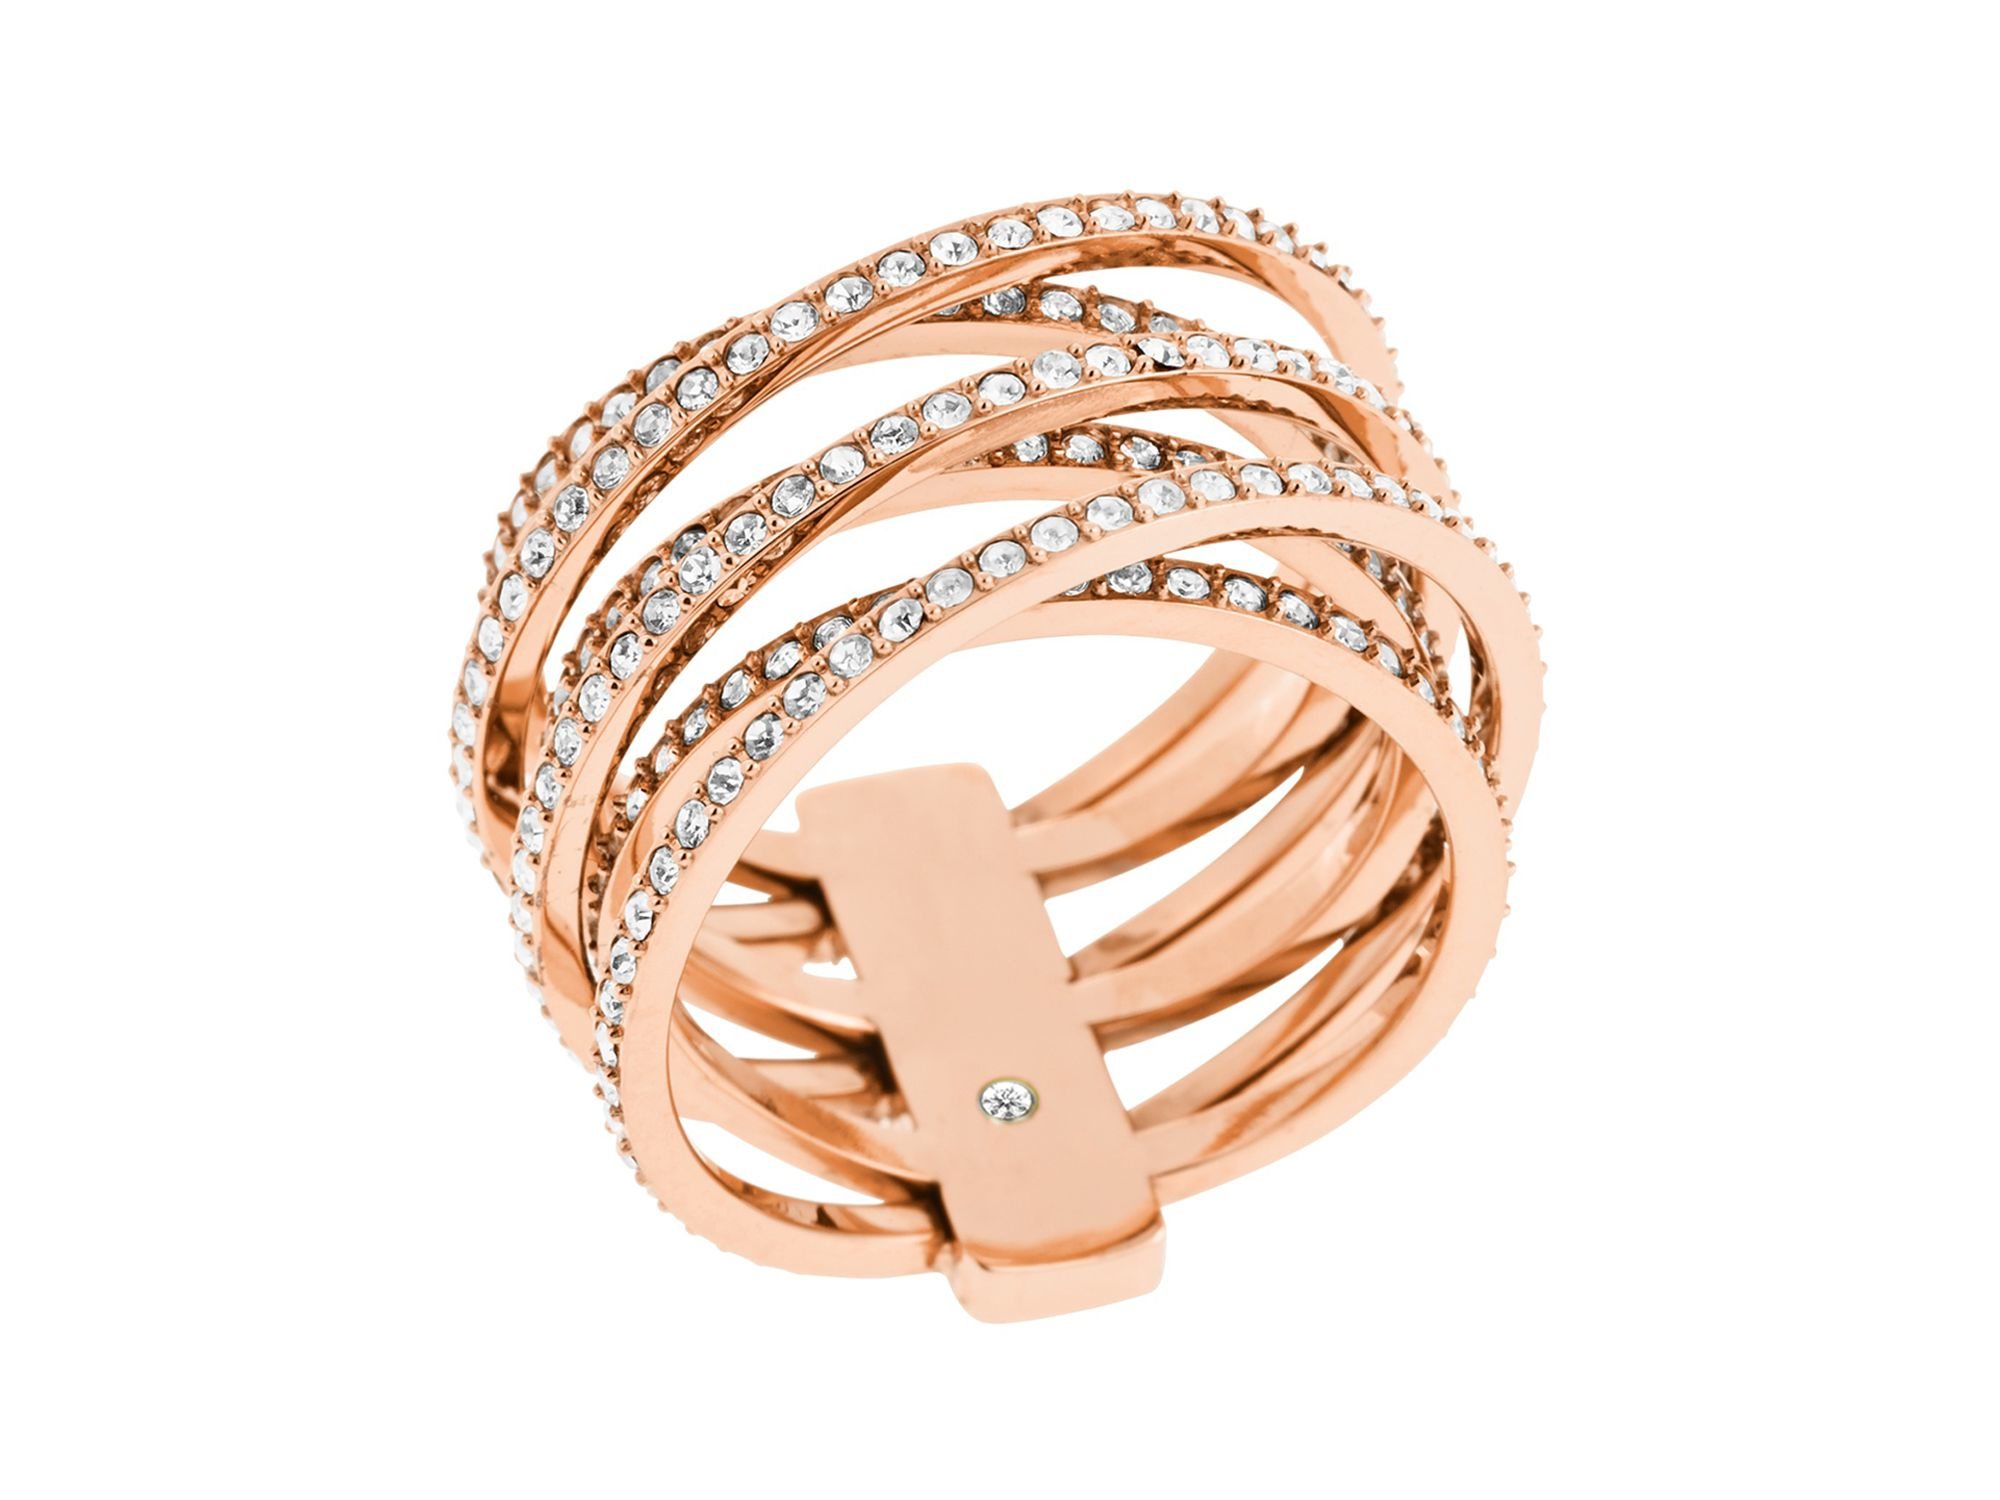 Michael Criss Cross Ring in Rose Gold - Lyst